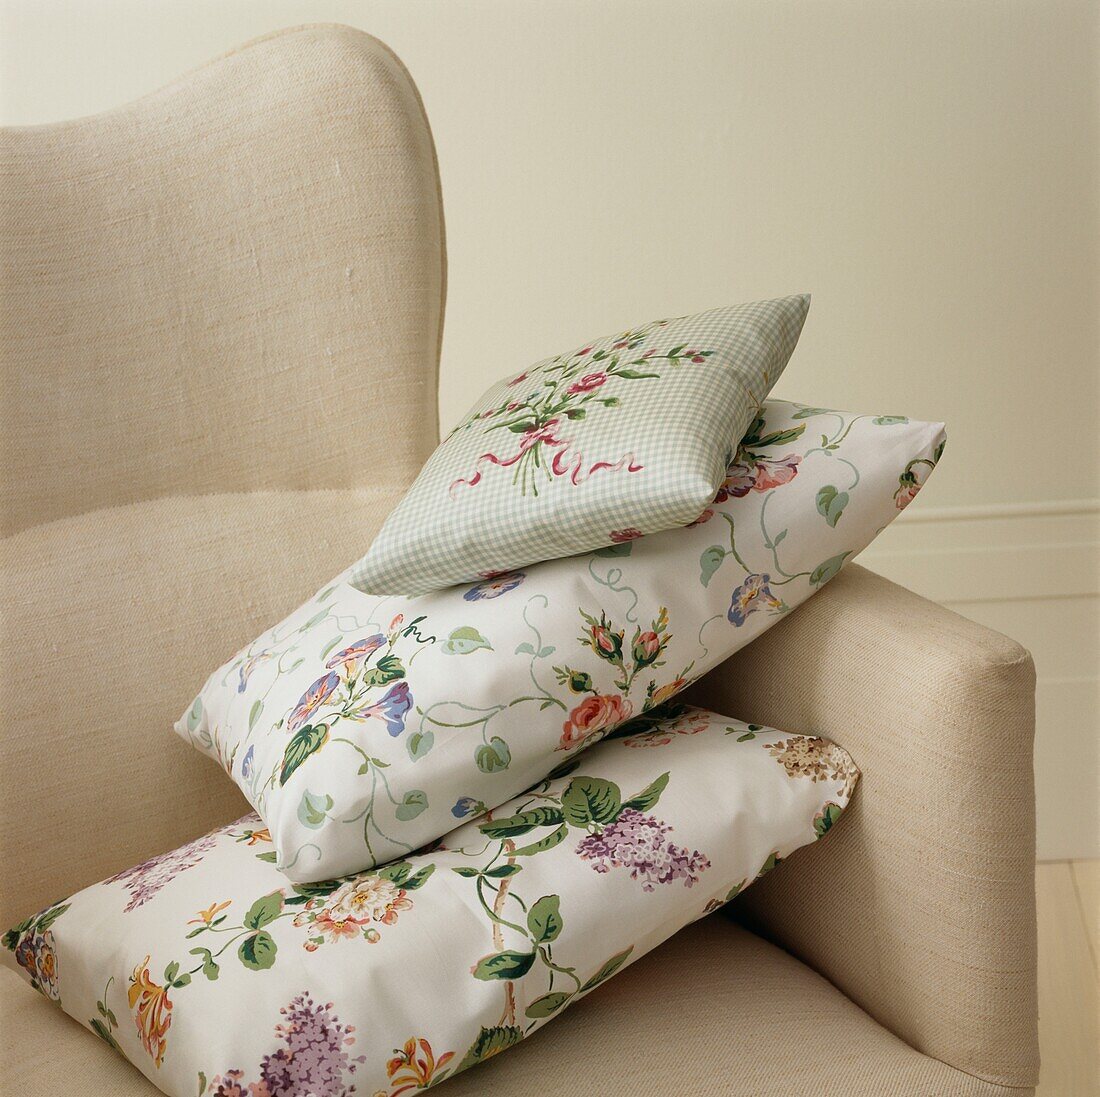 Three floral patterned cushions on a beige armchair